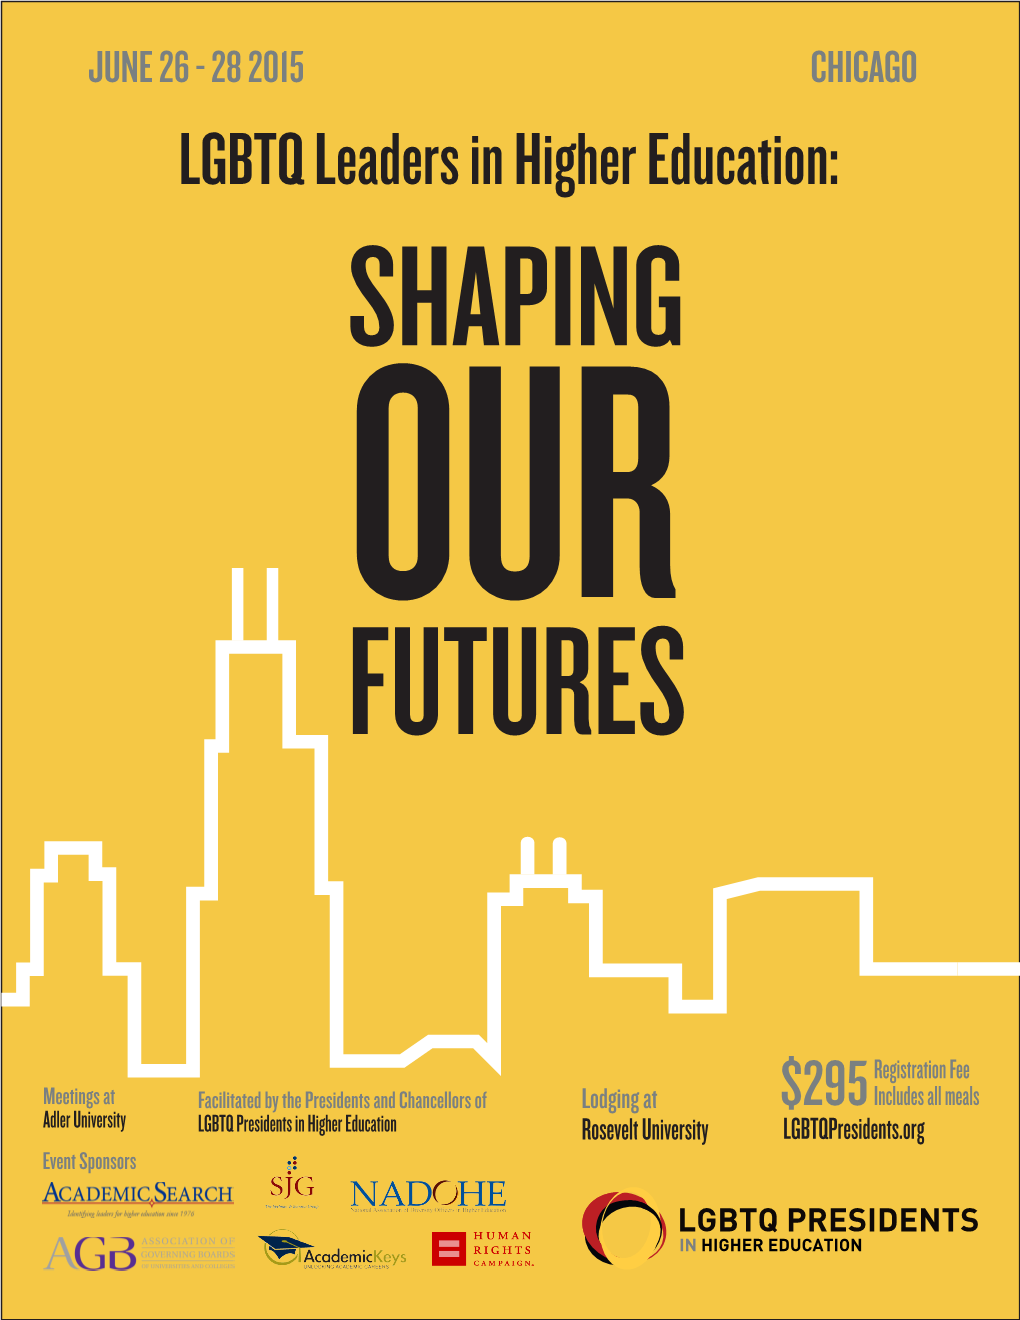 LGBTQ Leaders in Higher Education: SHAPING OUR FUTURES